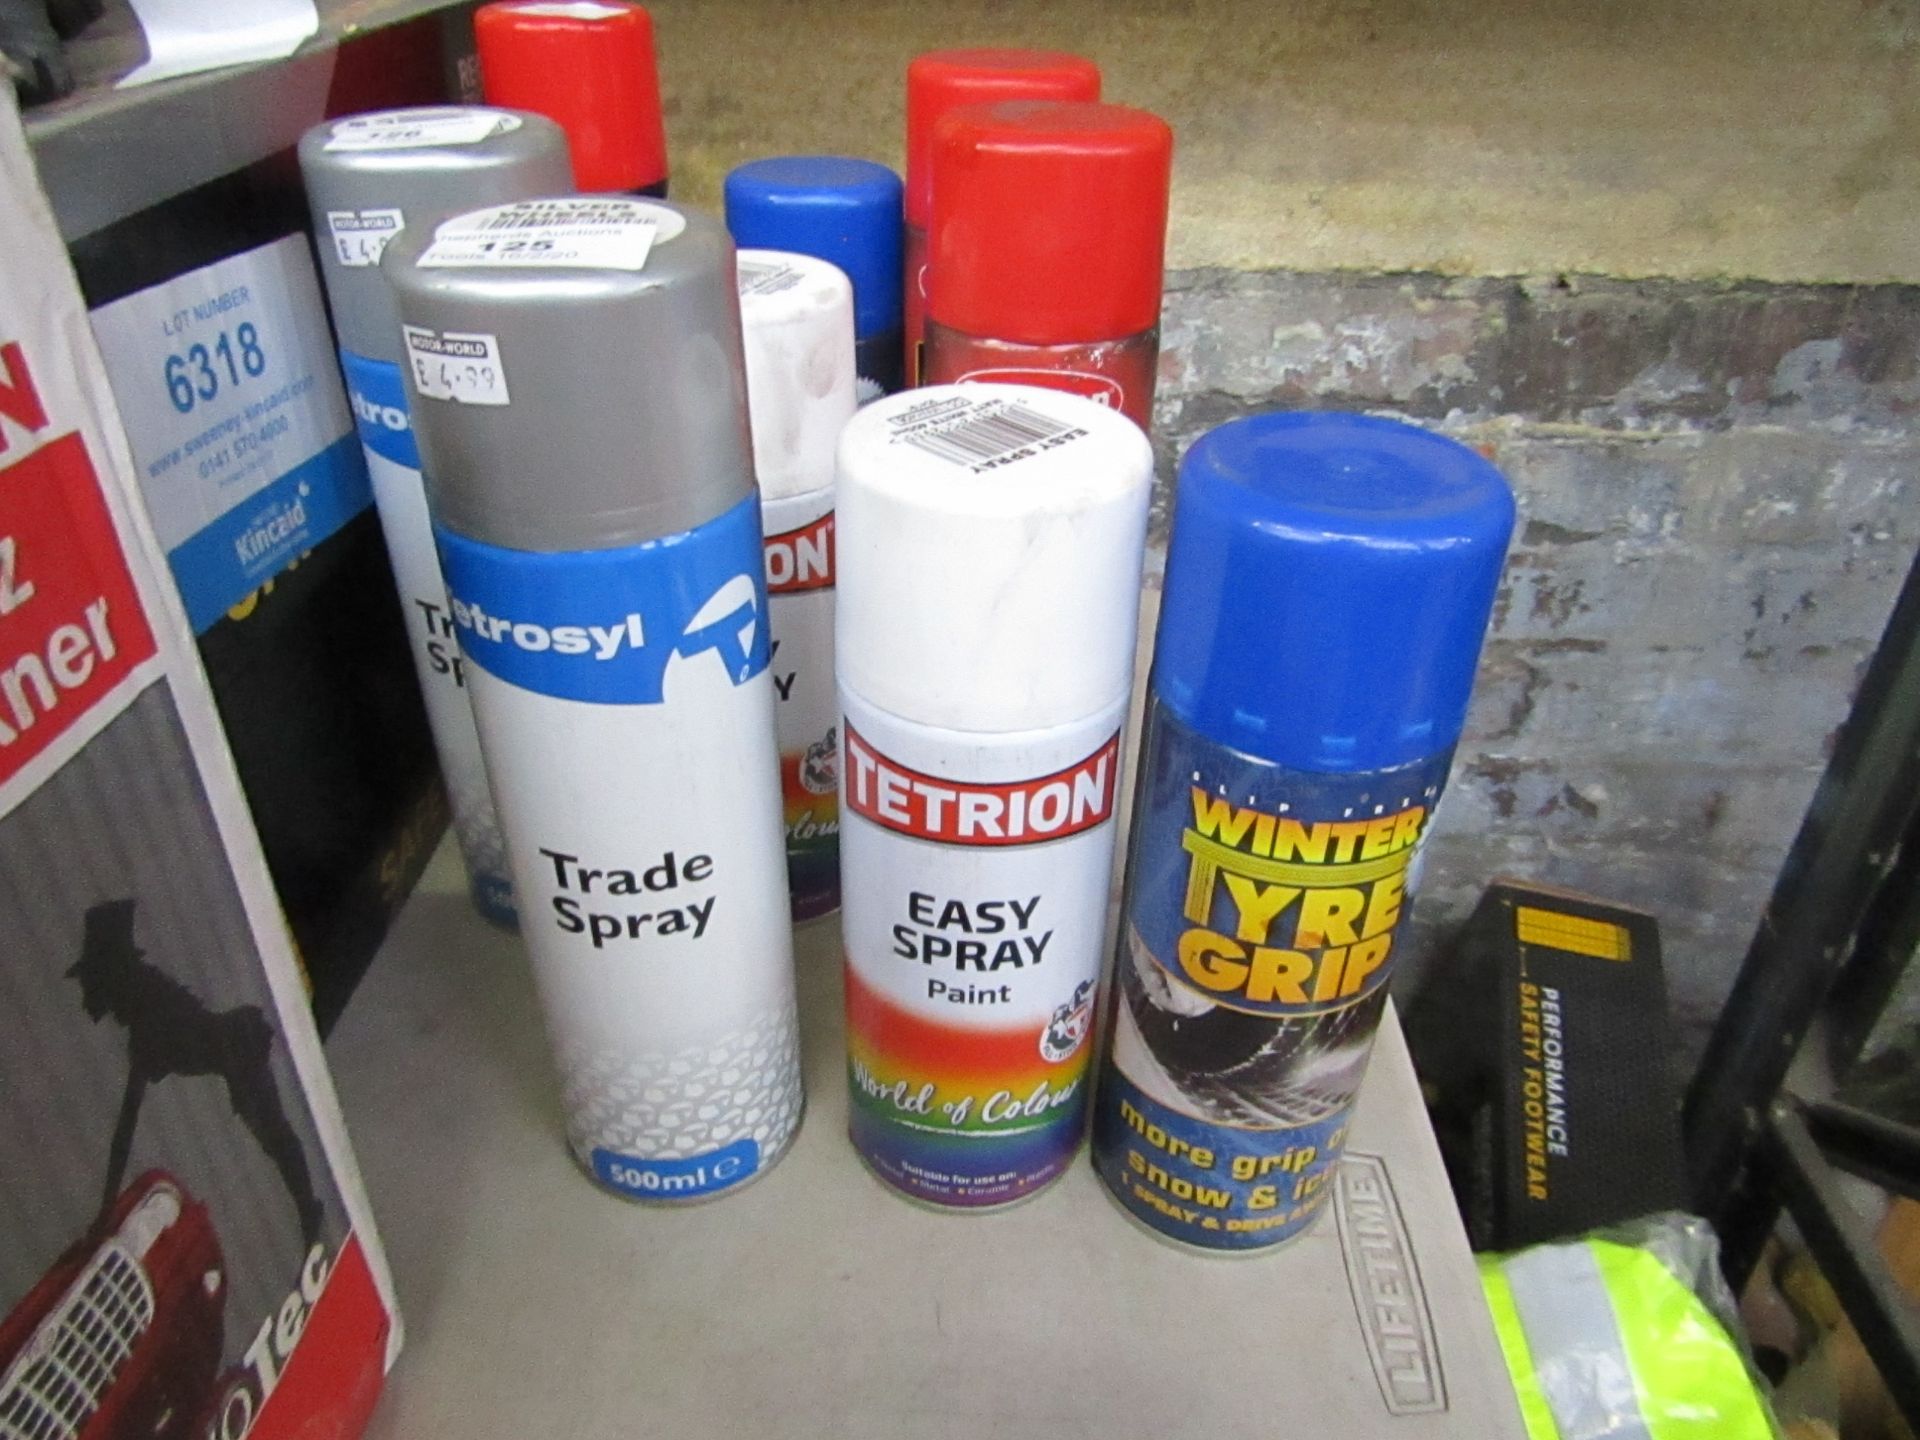 2x Items being; 400ml winter tyre grip with a 400ml Tetrion easy spray paint and a 500ml Tetrosyl